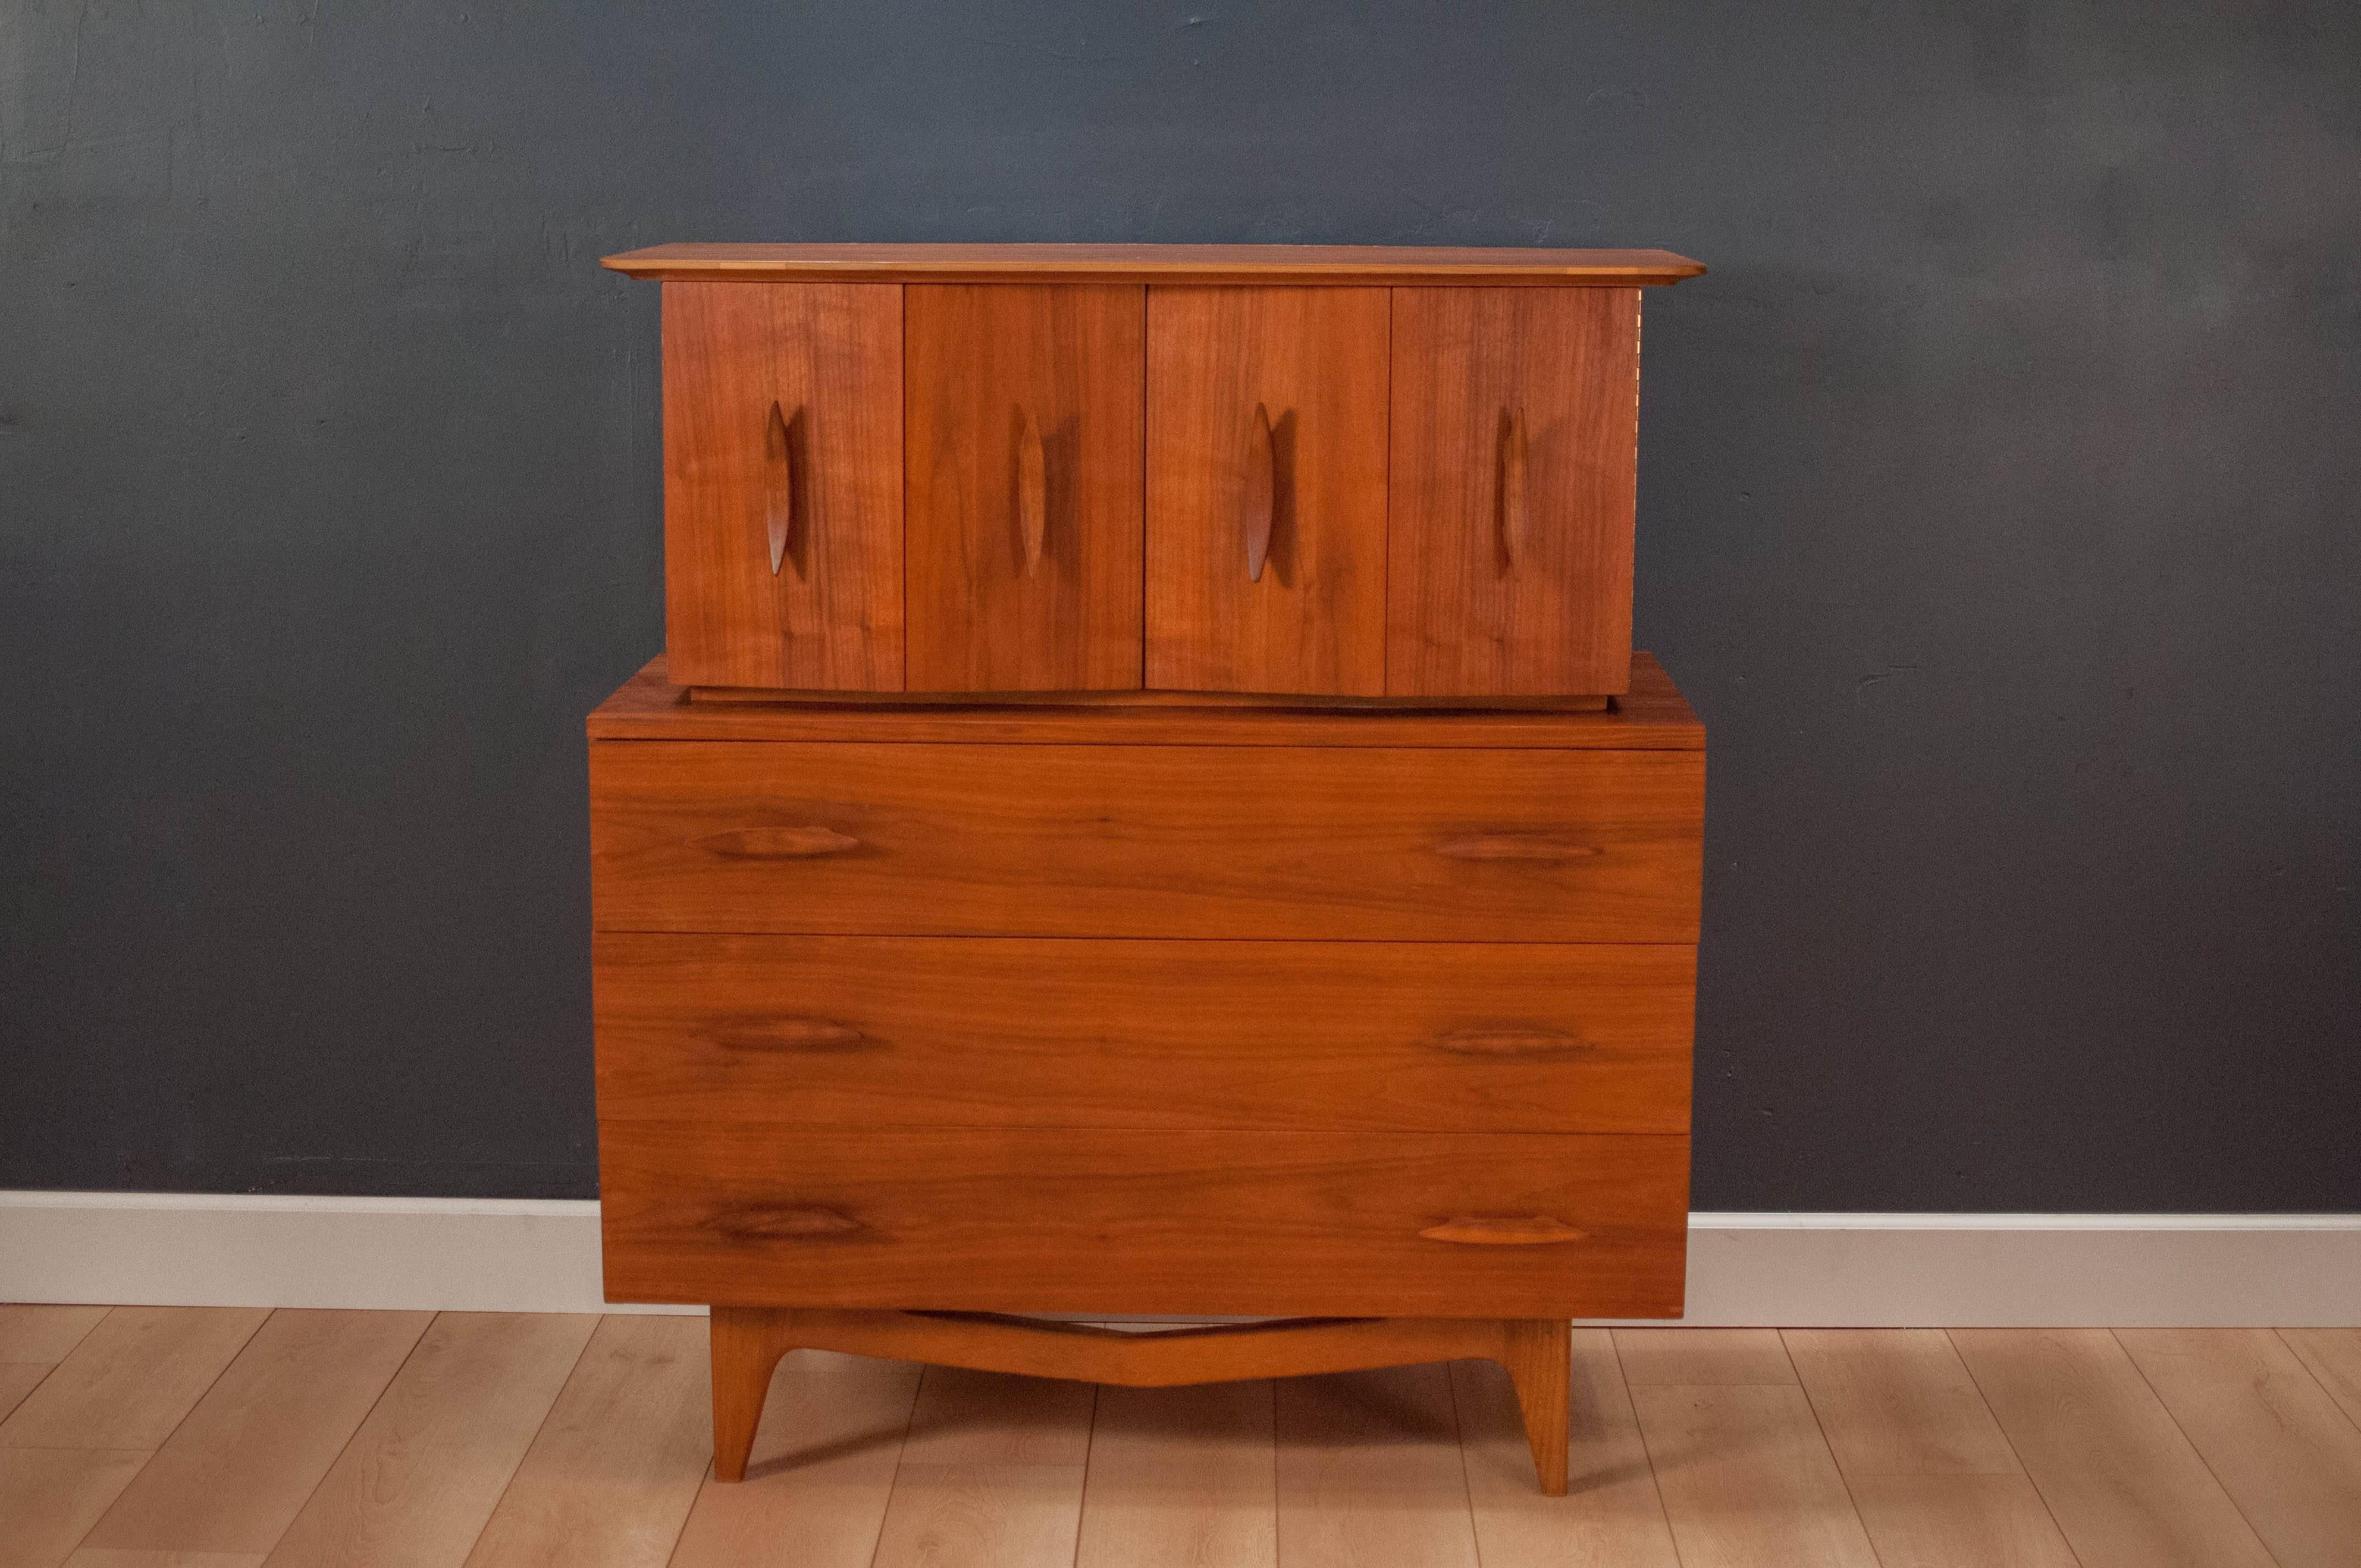 Mid-Century Tall Dresser in walnut c. 1950's. This unique piece features sculpted solid wood handles and atomic style legs. Equipped with seven deep storage drawers. 

